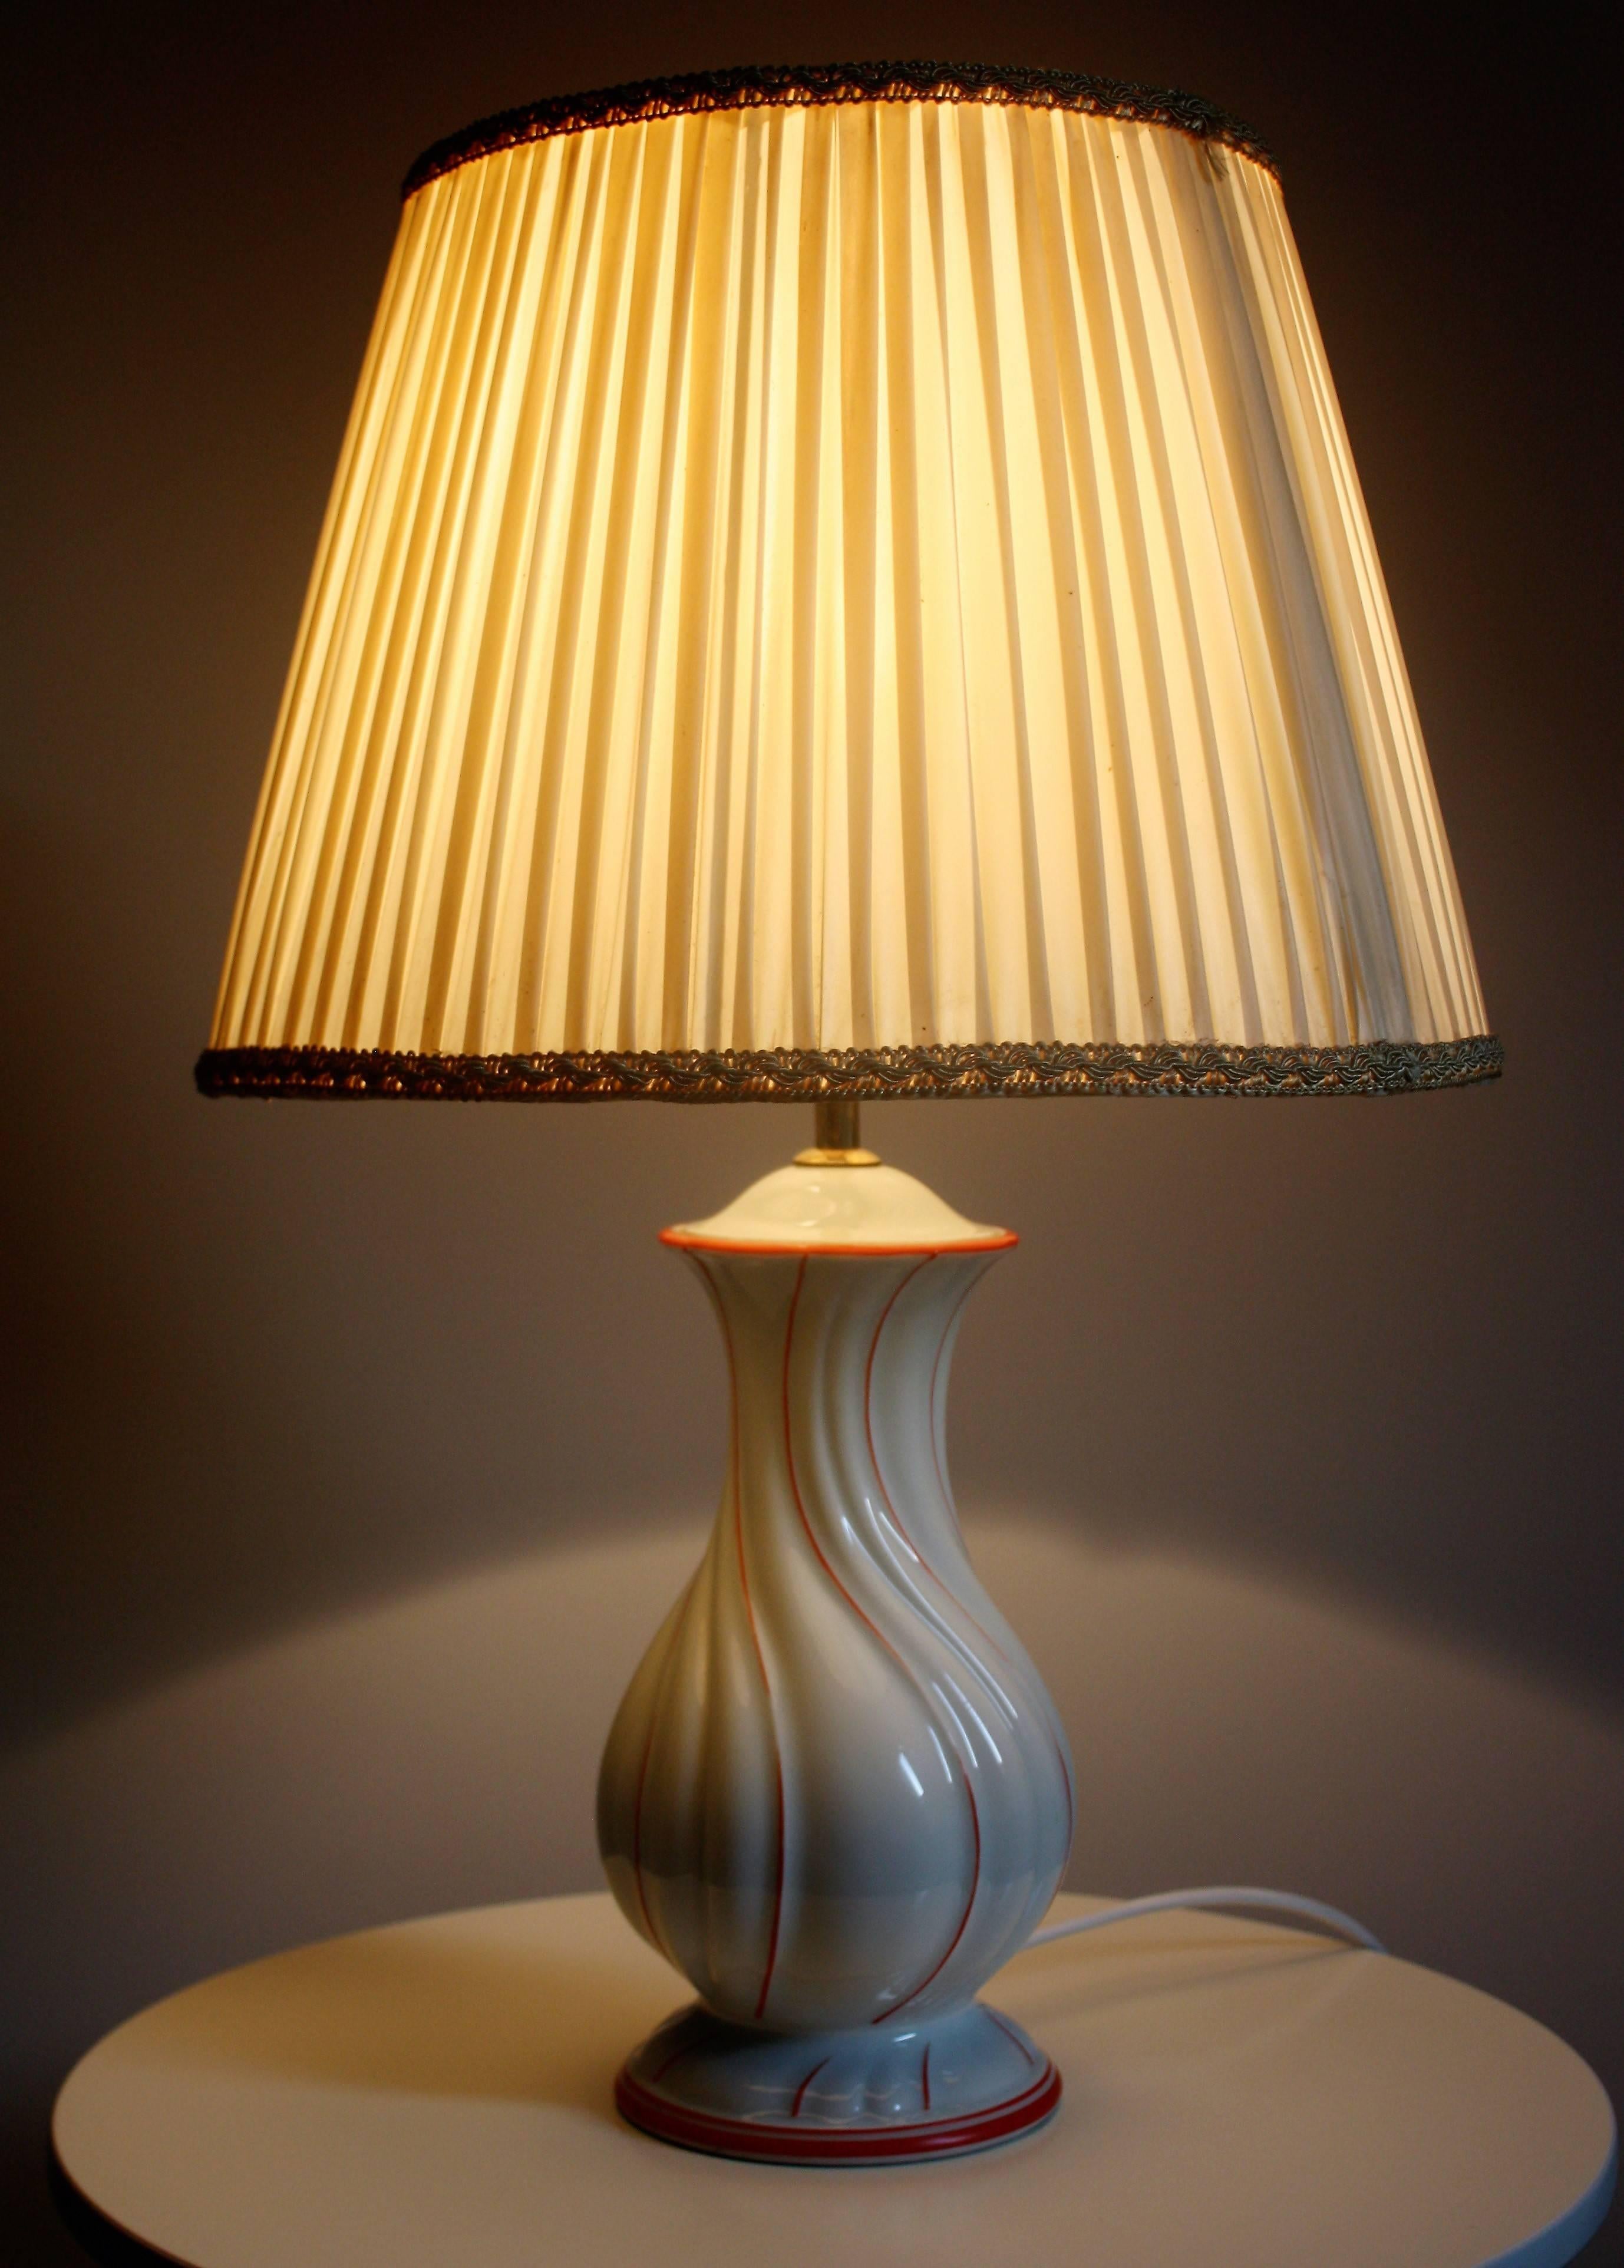 Unusually porcelain table lamp by Rosenthal, circa 1957.
White porcelain with orange-red painting.
Socket: One x e27.